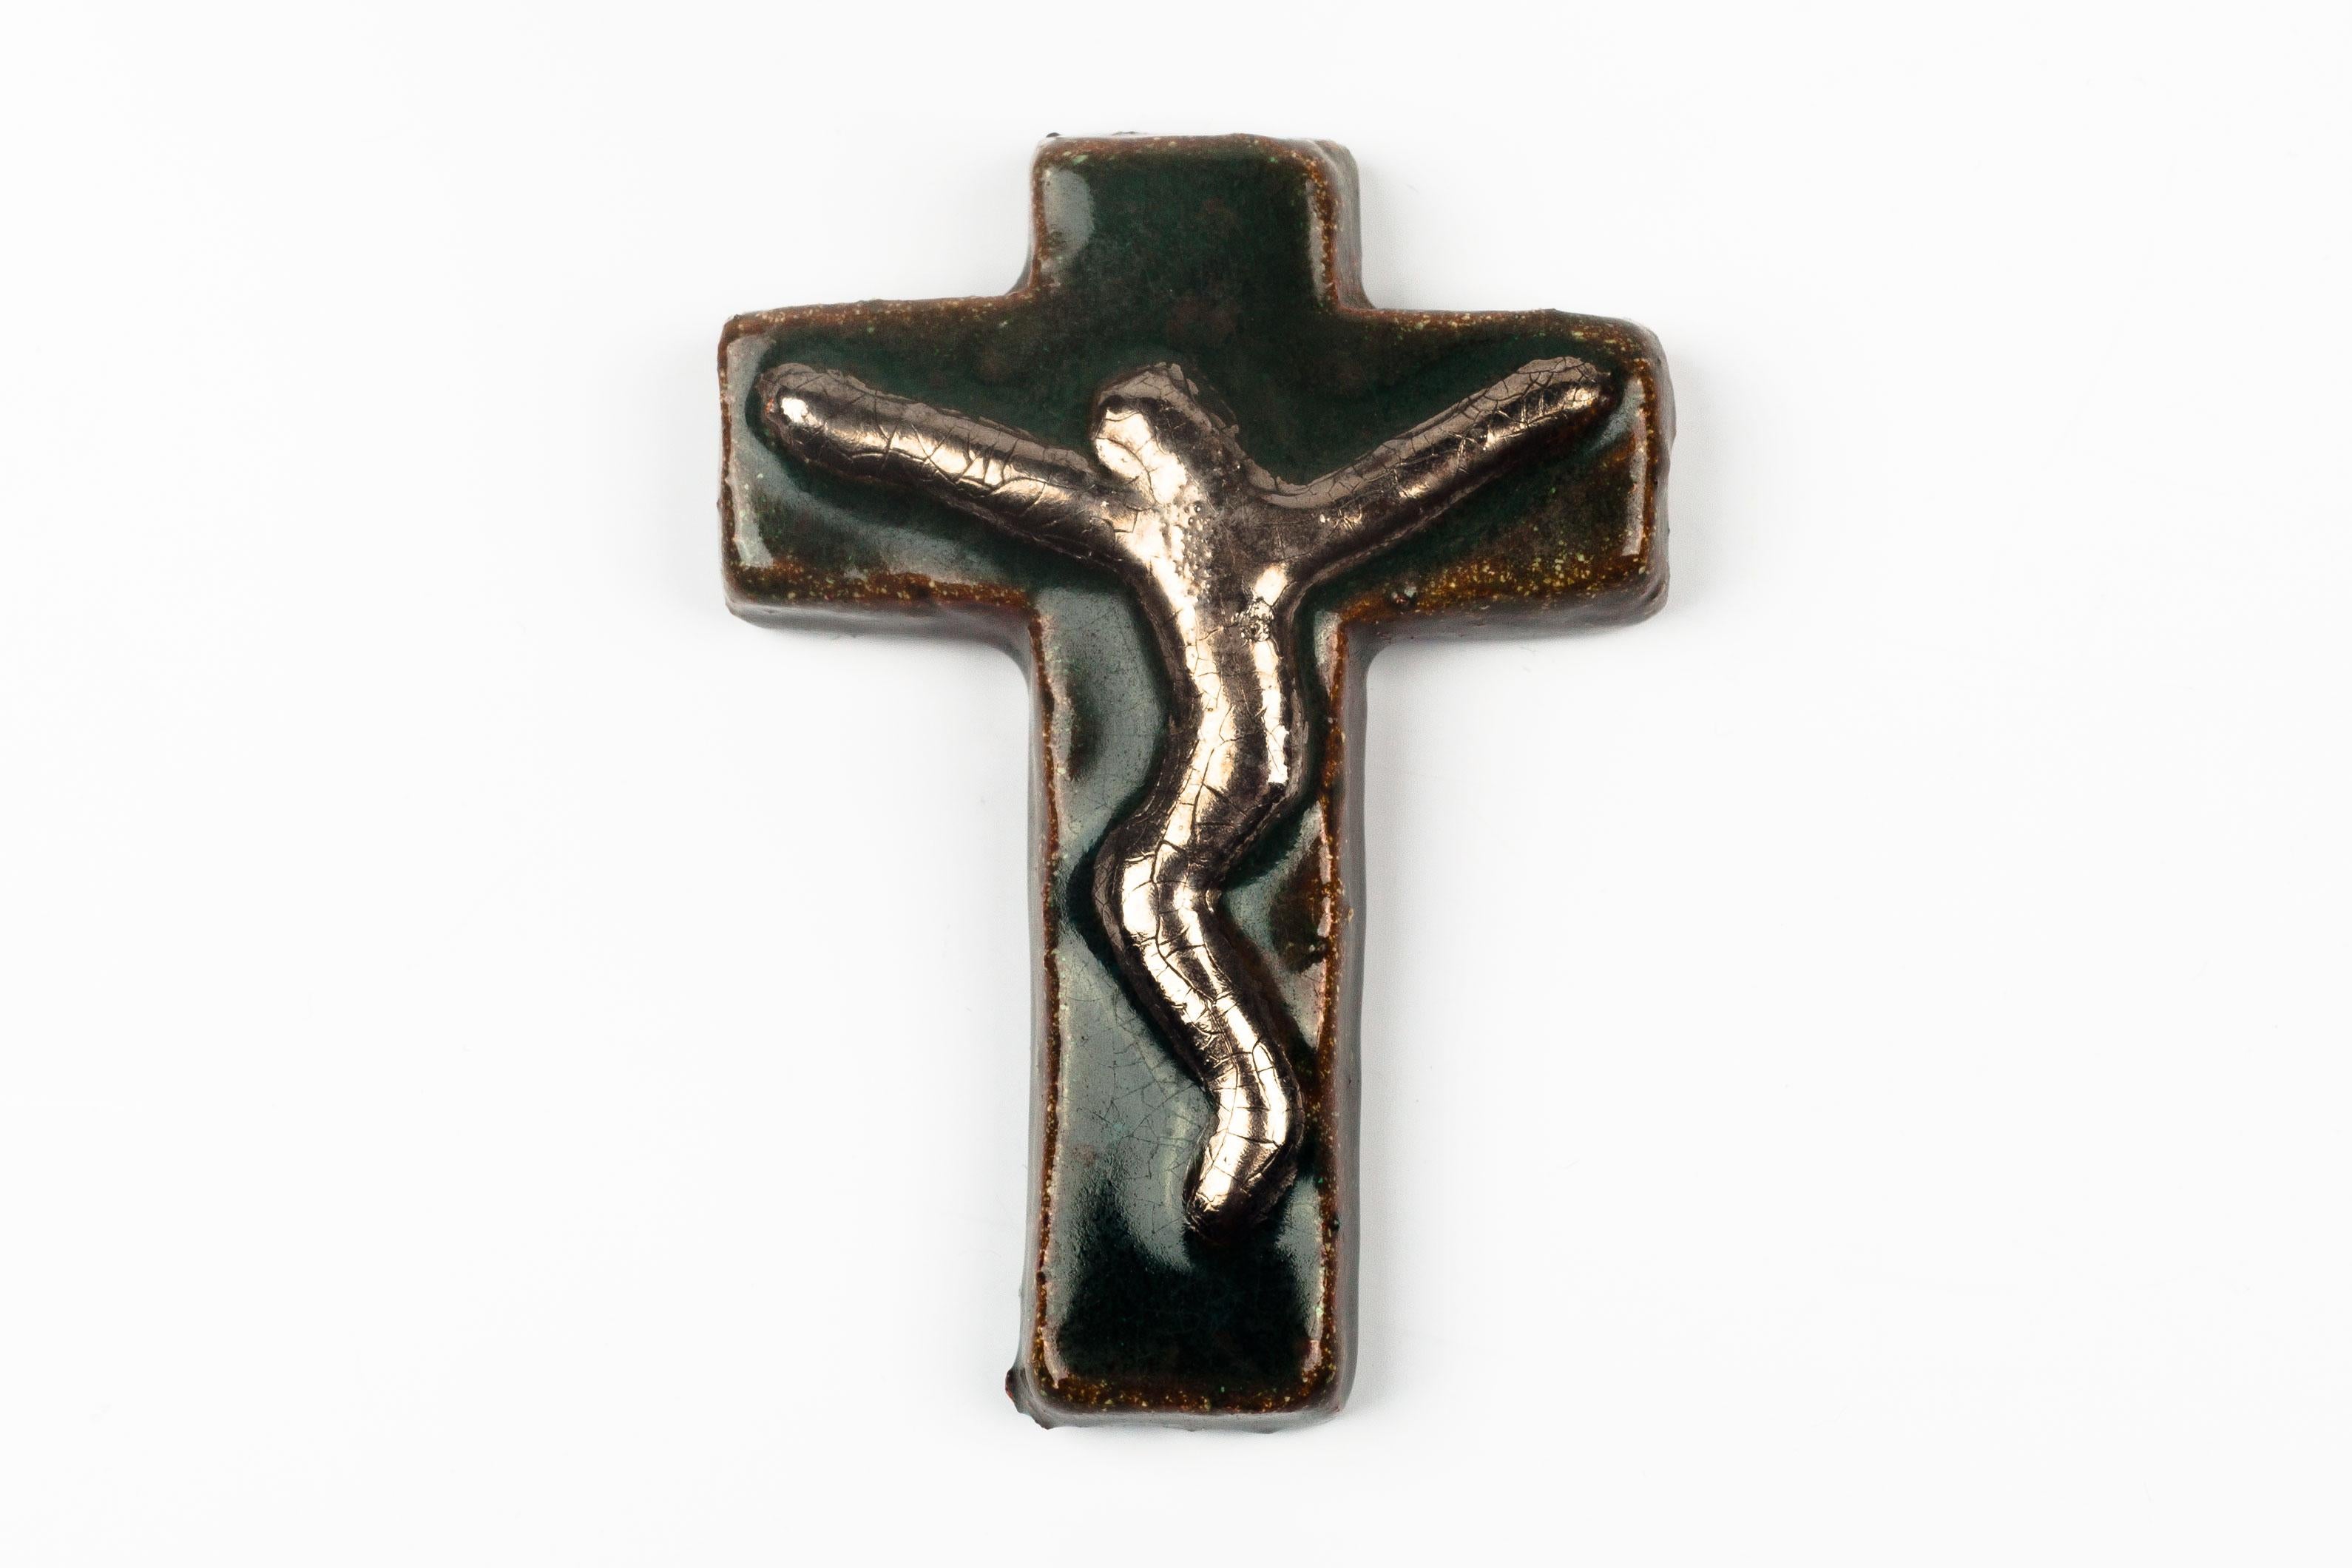 Preciously small crucifix in glazed ceramic, handmade made in Belgium in the 1970s. Glossy deep green and brown with metallic gold raised christ figure at its center.

This piece is part of a large ceramic crucifix collection, all made in Belgium